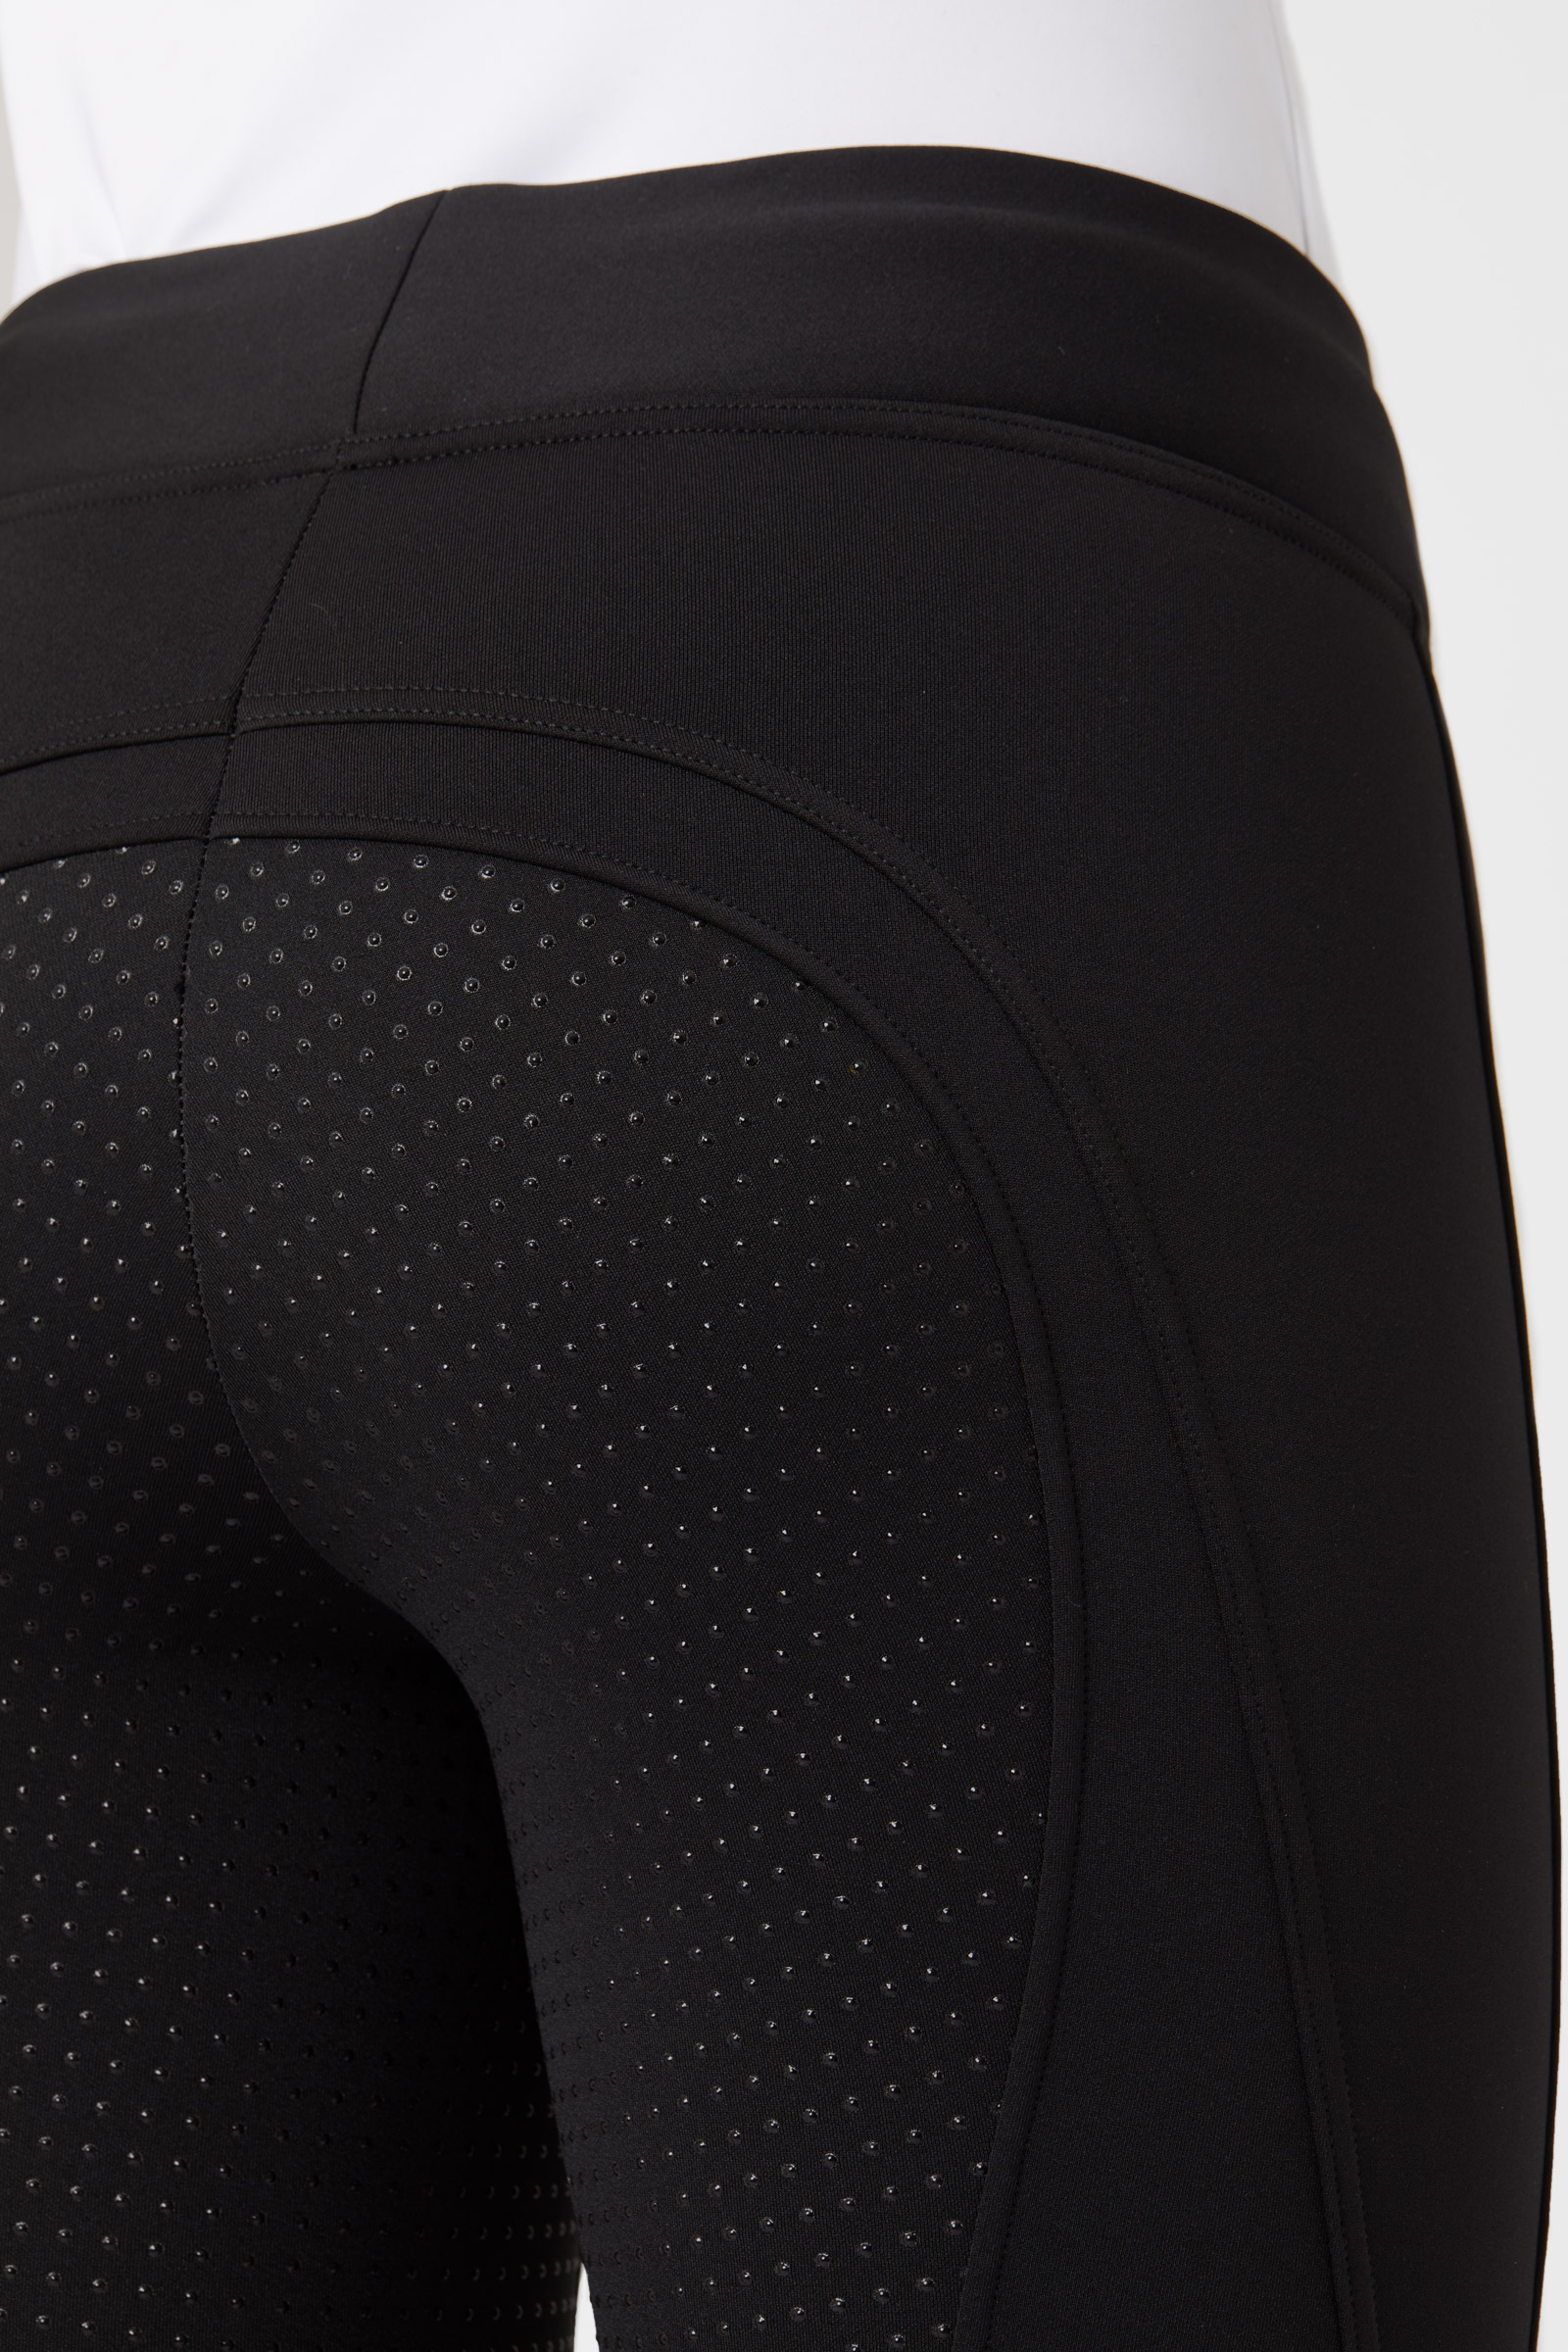 Buy Horze Active Women's Winter Silicone Full seat Tights